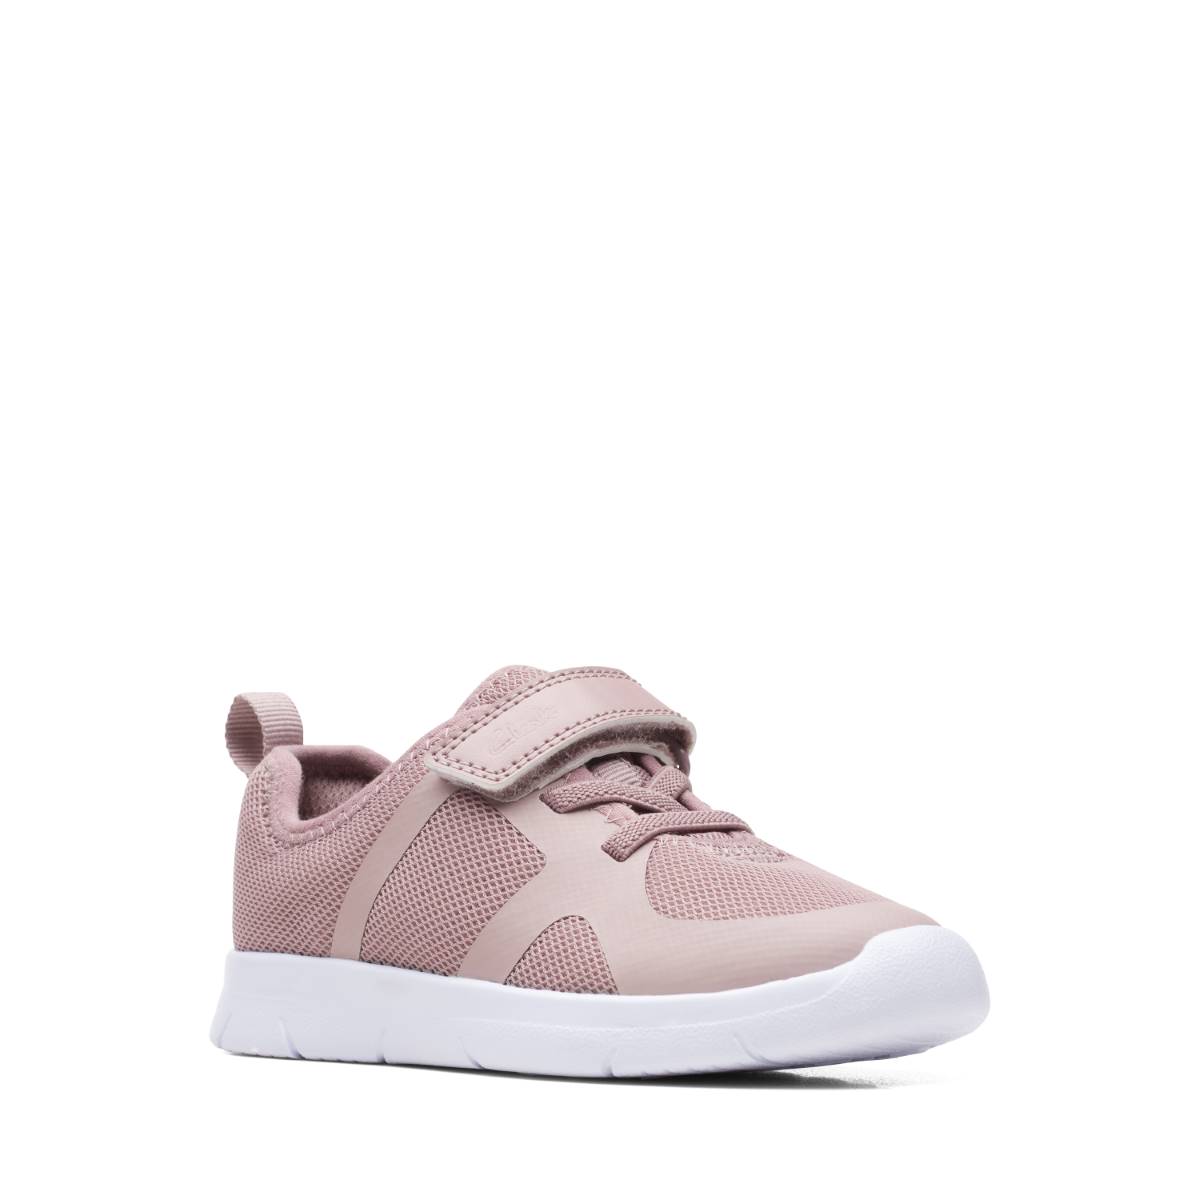 Clarks Ath Flux K Pale pink Kids toddler girls trainers 6481-76F in a Plain Textile in Size 9.5